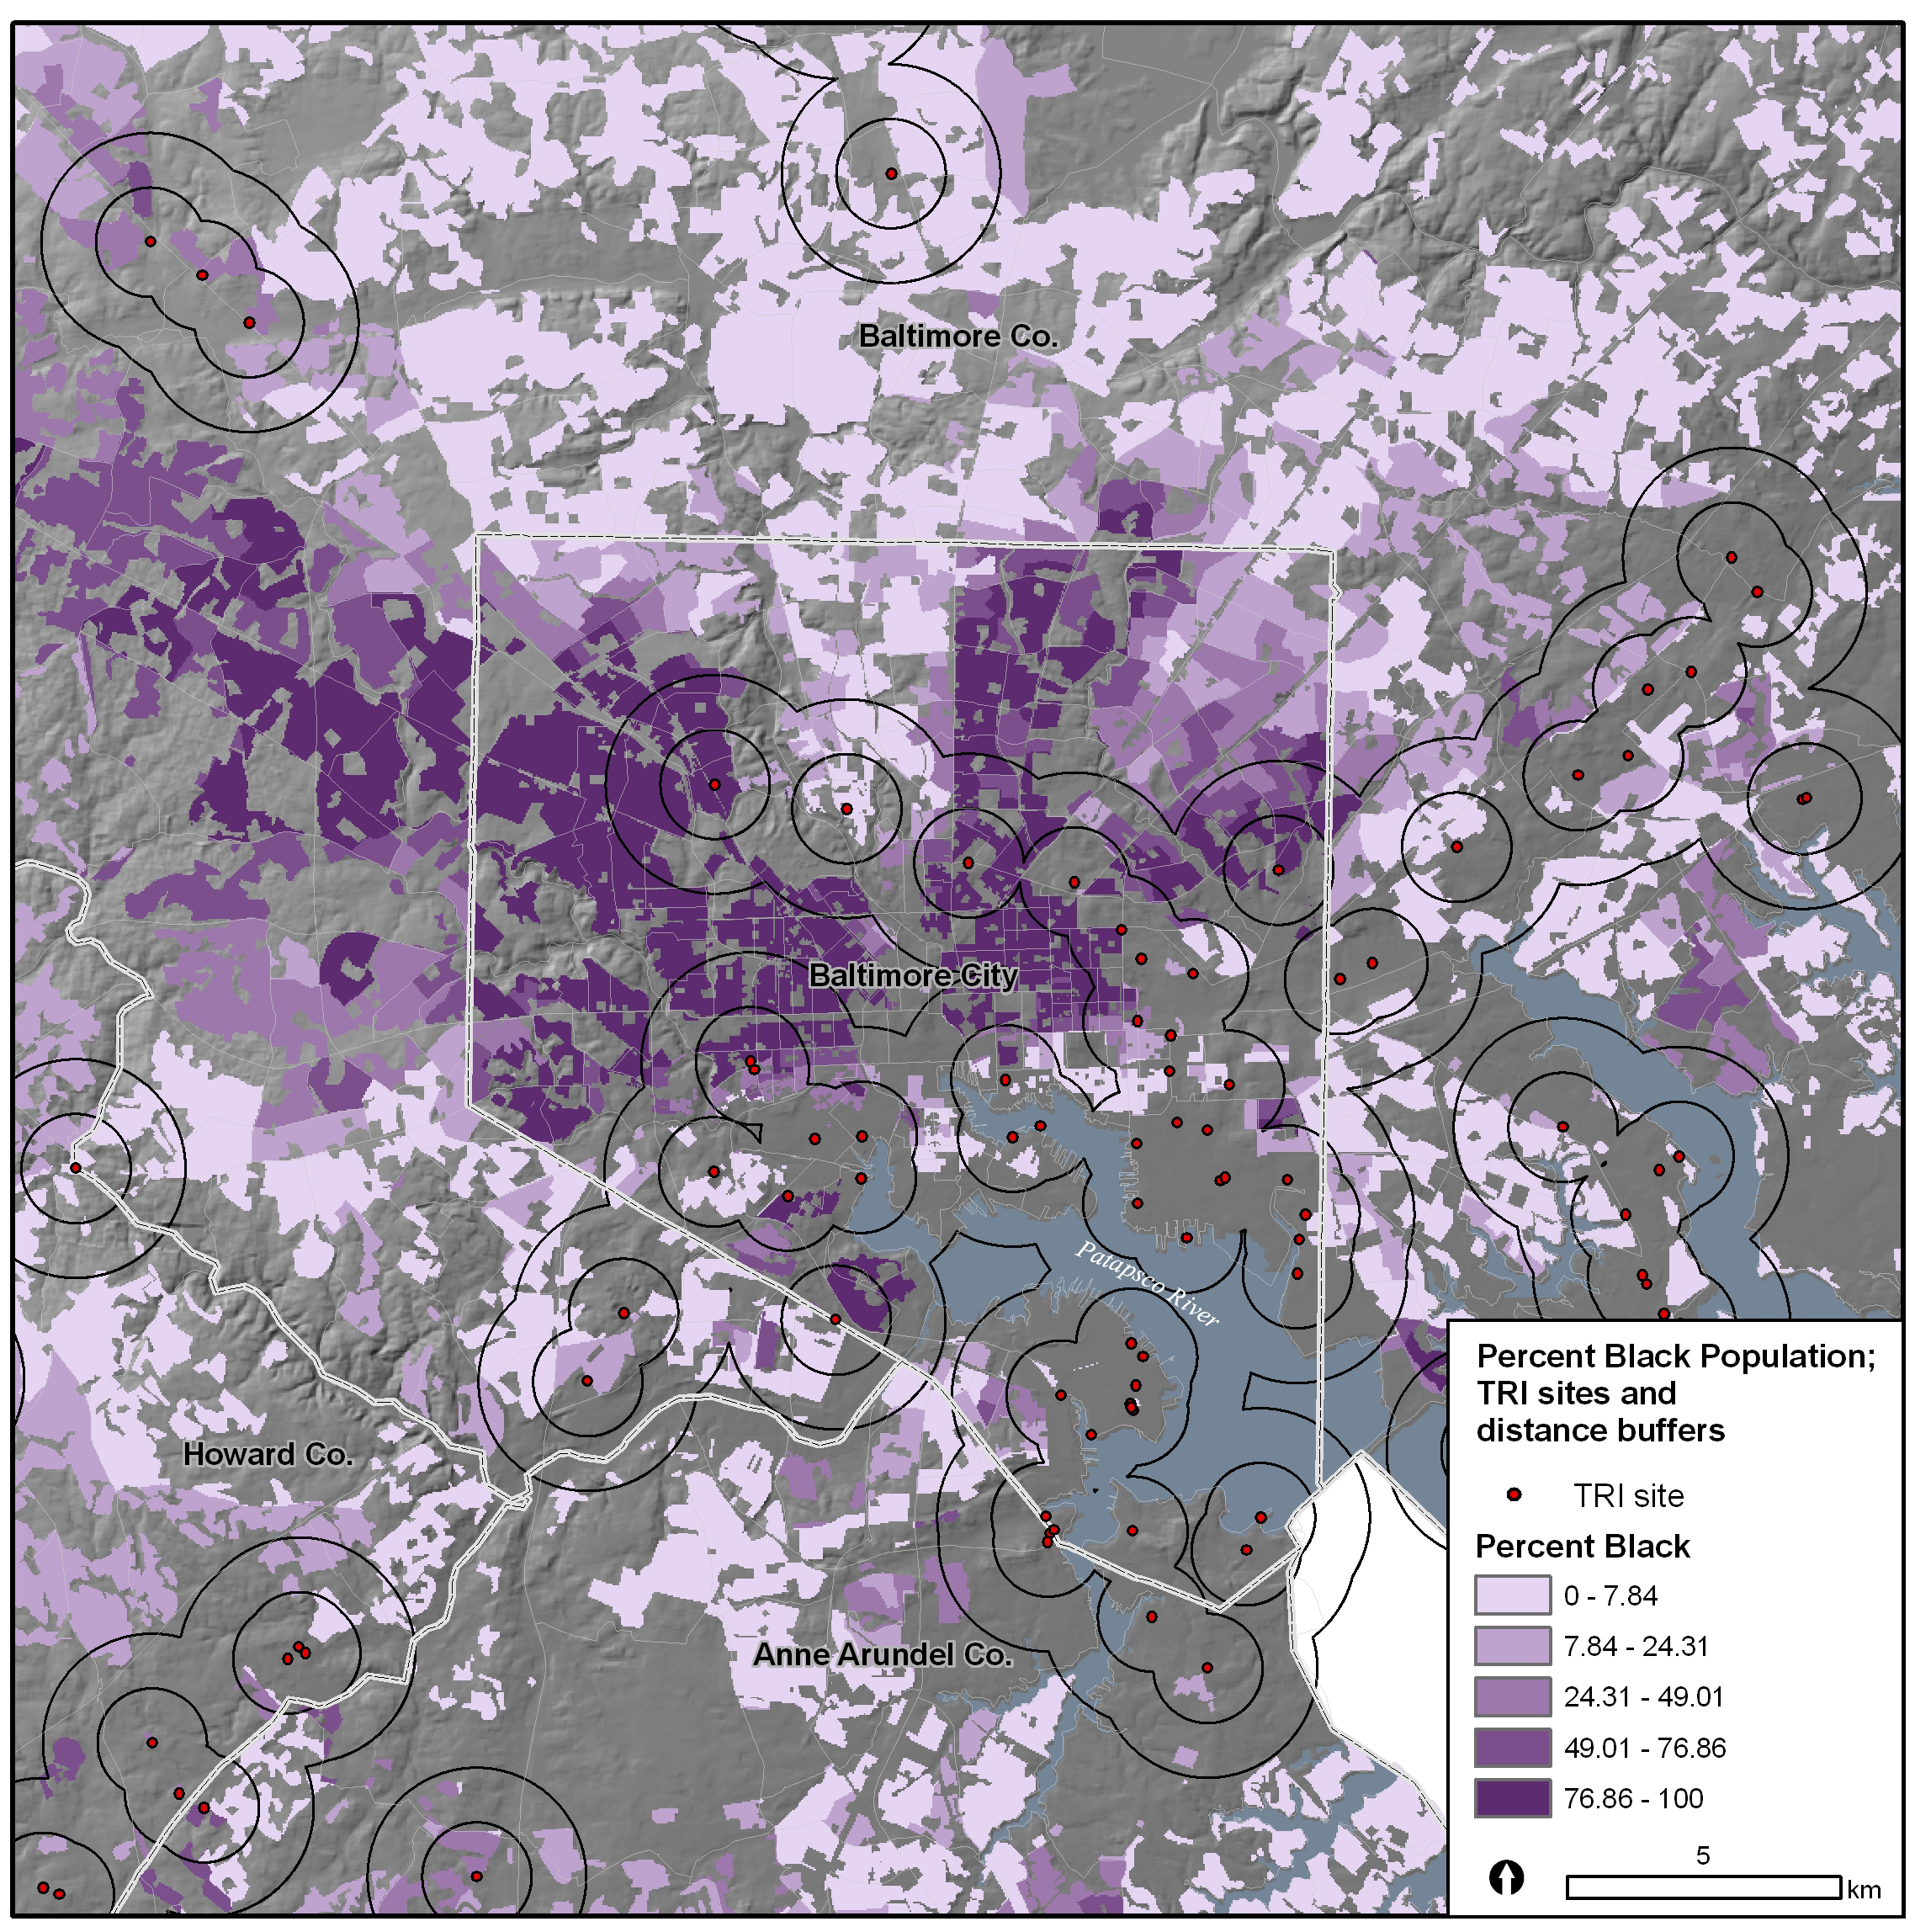 Industries that release toxins into the environment are more likely to be found in white rather than African-American neighborhoods in Baltimore. Ironically, the present pattern is the product of residential and occupational segregation that privileged white workers with the opportunity to live near factory jobs.